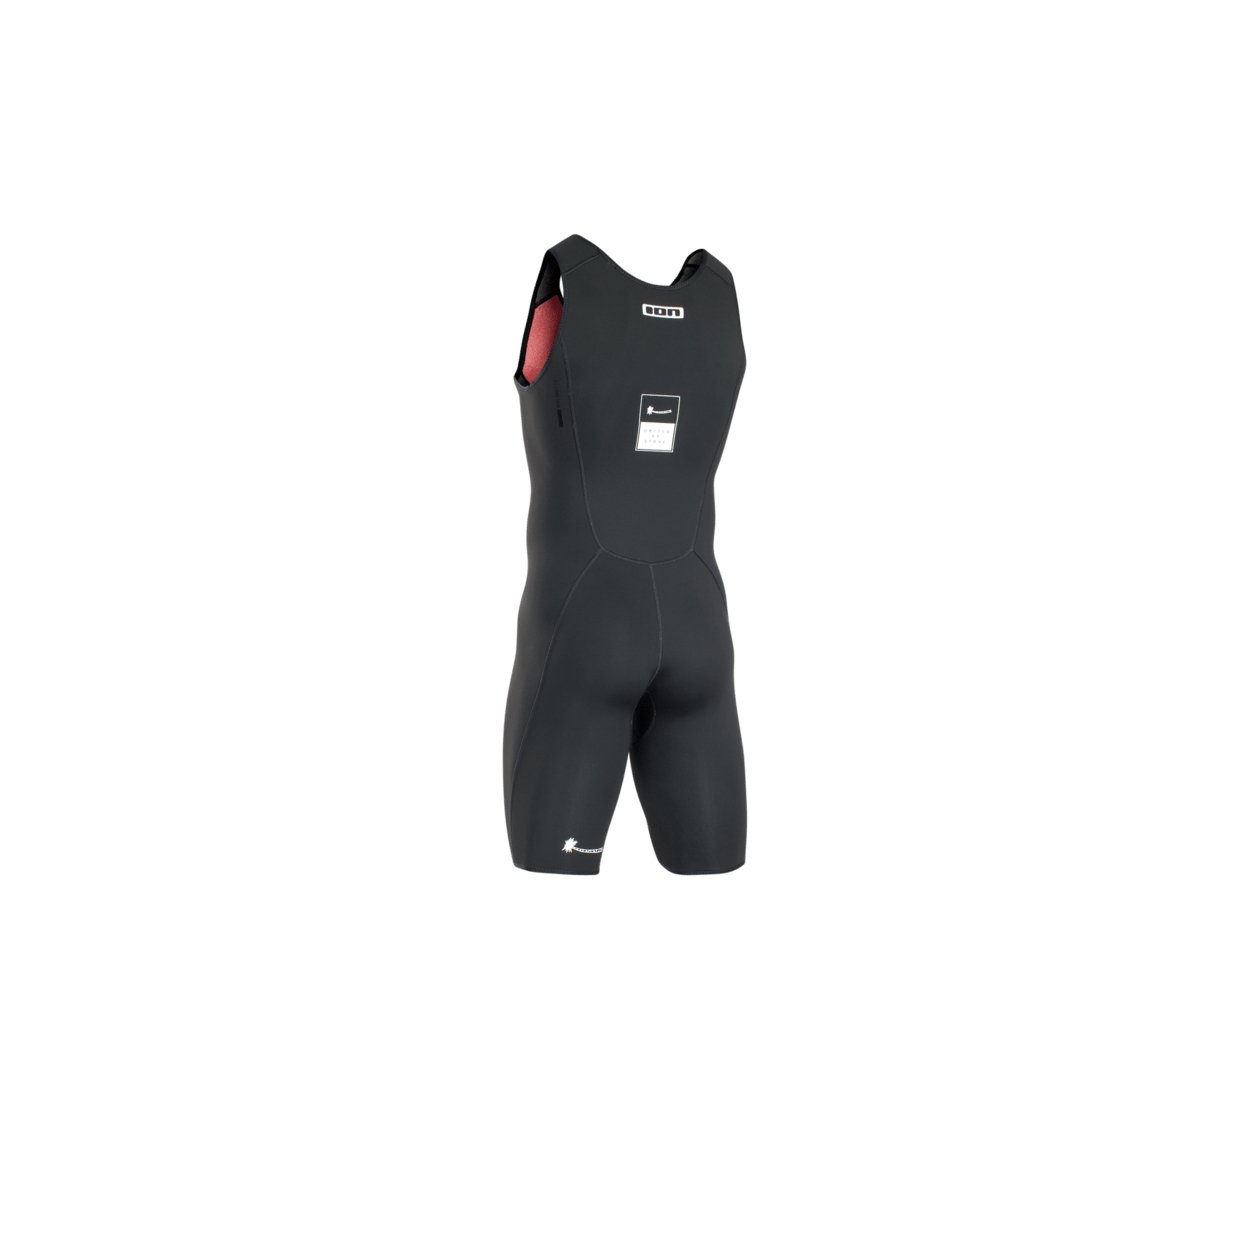 ION Monoshorty 0.5 2022 - Worthing Watersports - 9008415881253 - Wetsuits - ION Water